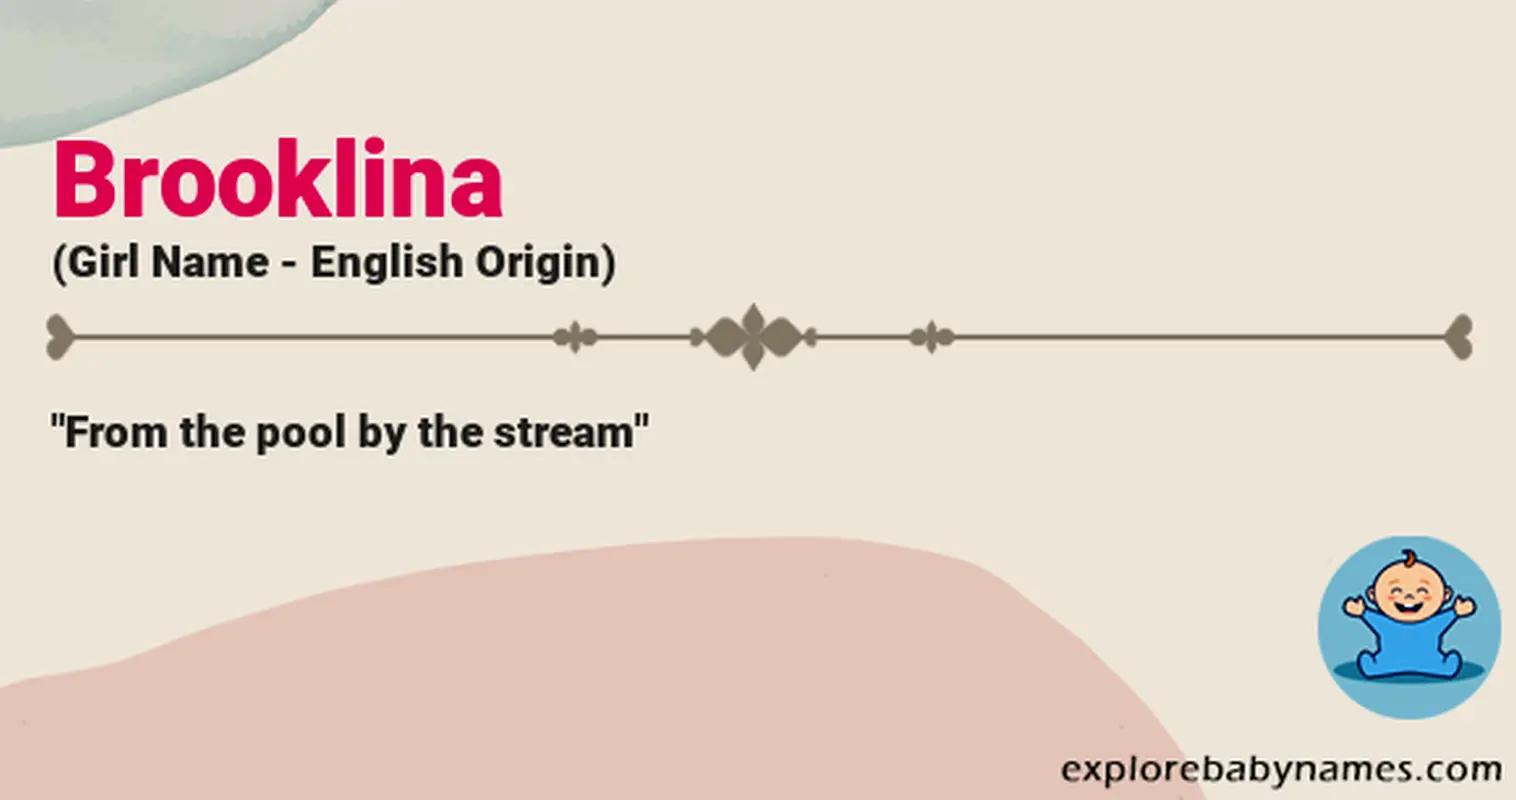 Meaning of Brooklina